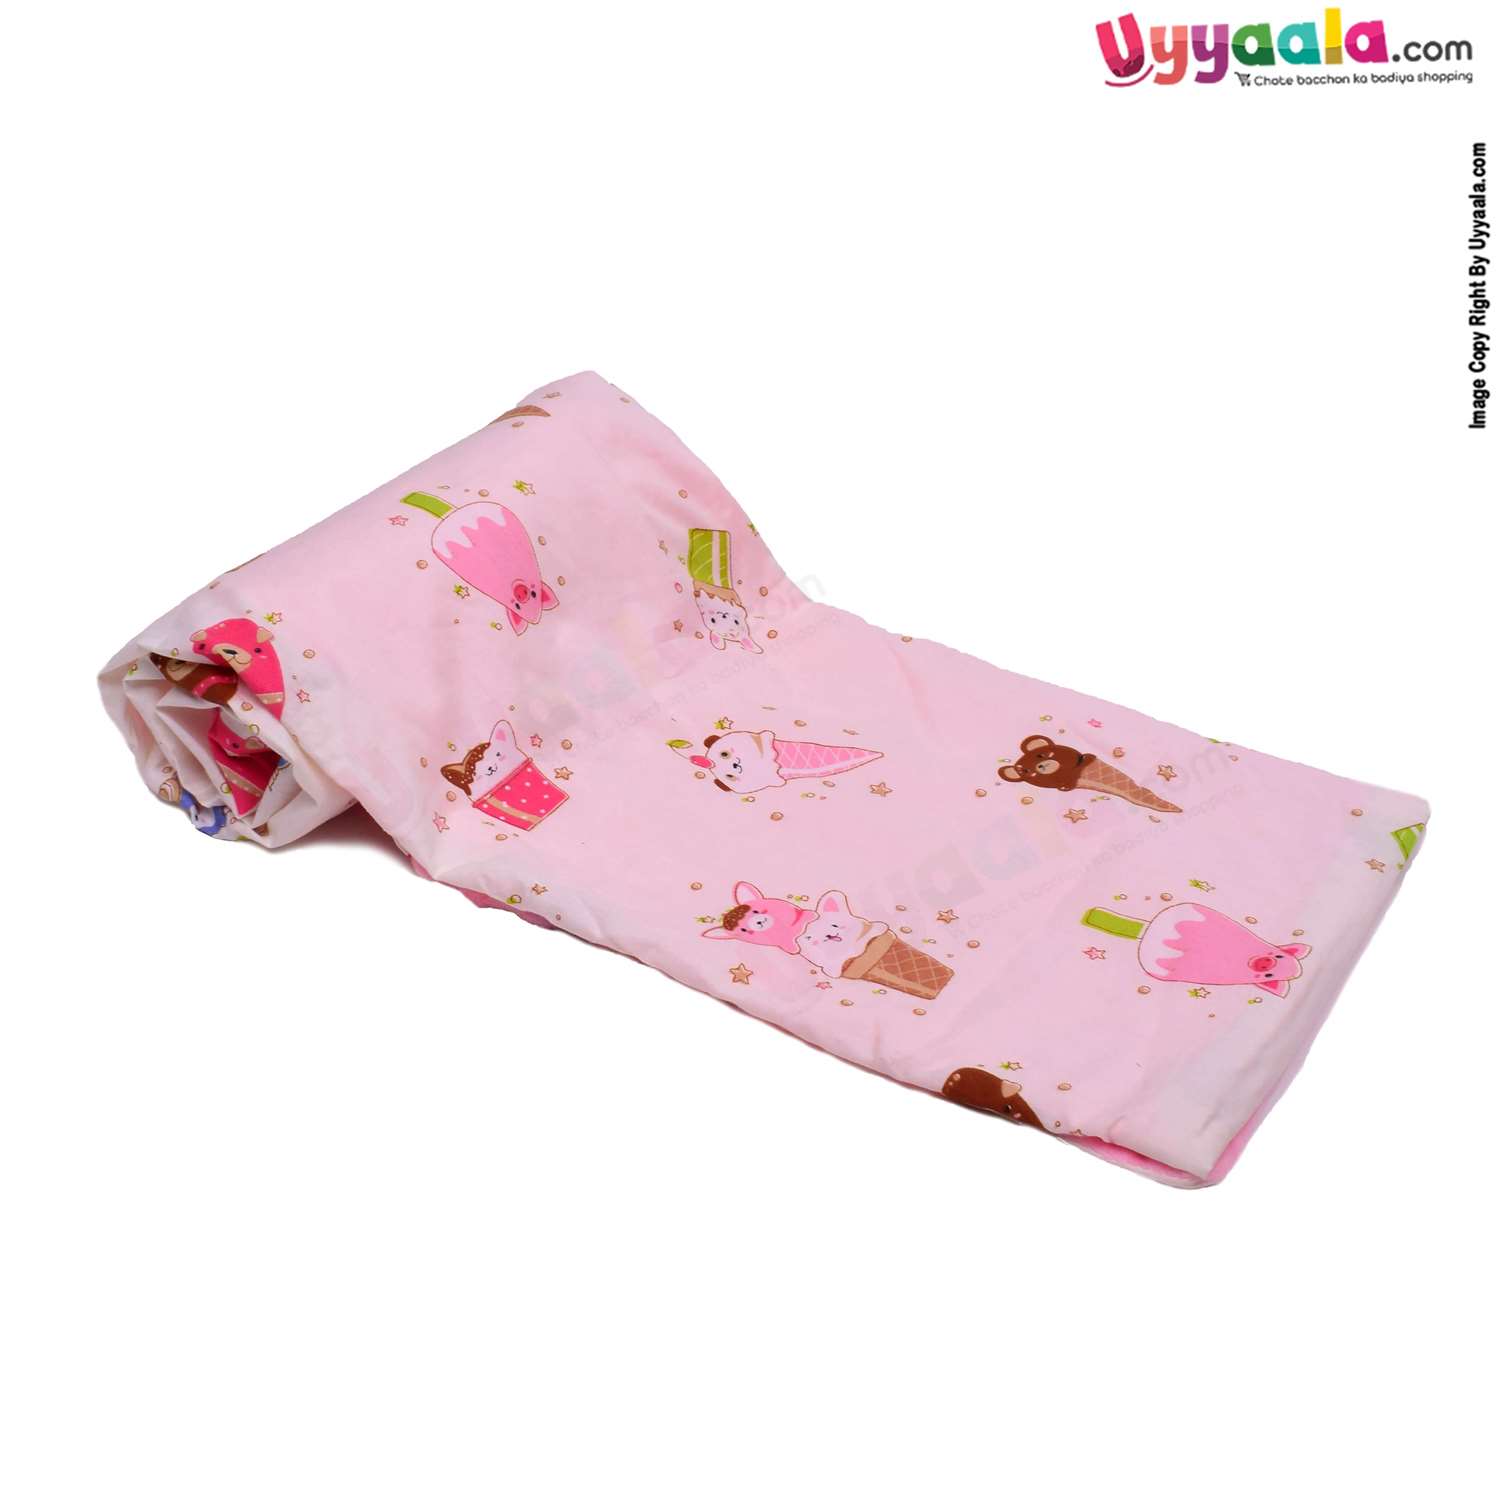 Double Layered Blanket One Side Fur & Another Side Cotton with Ice Creams Print for Babies 0-24m Age, Size (106*75cm) -Light Pink